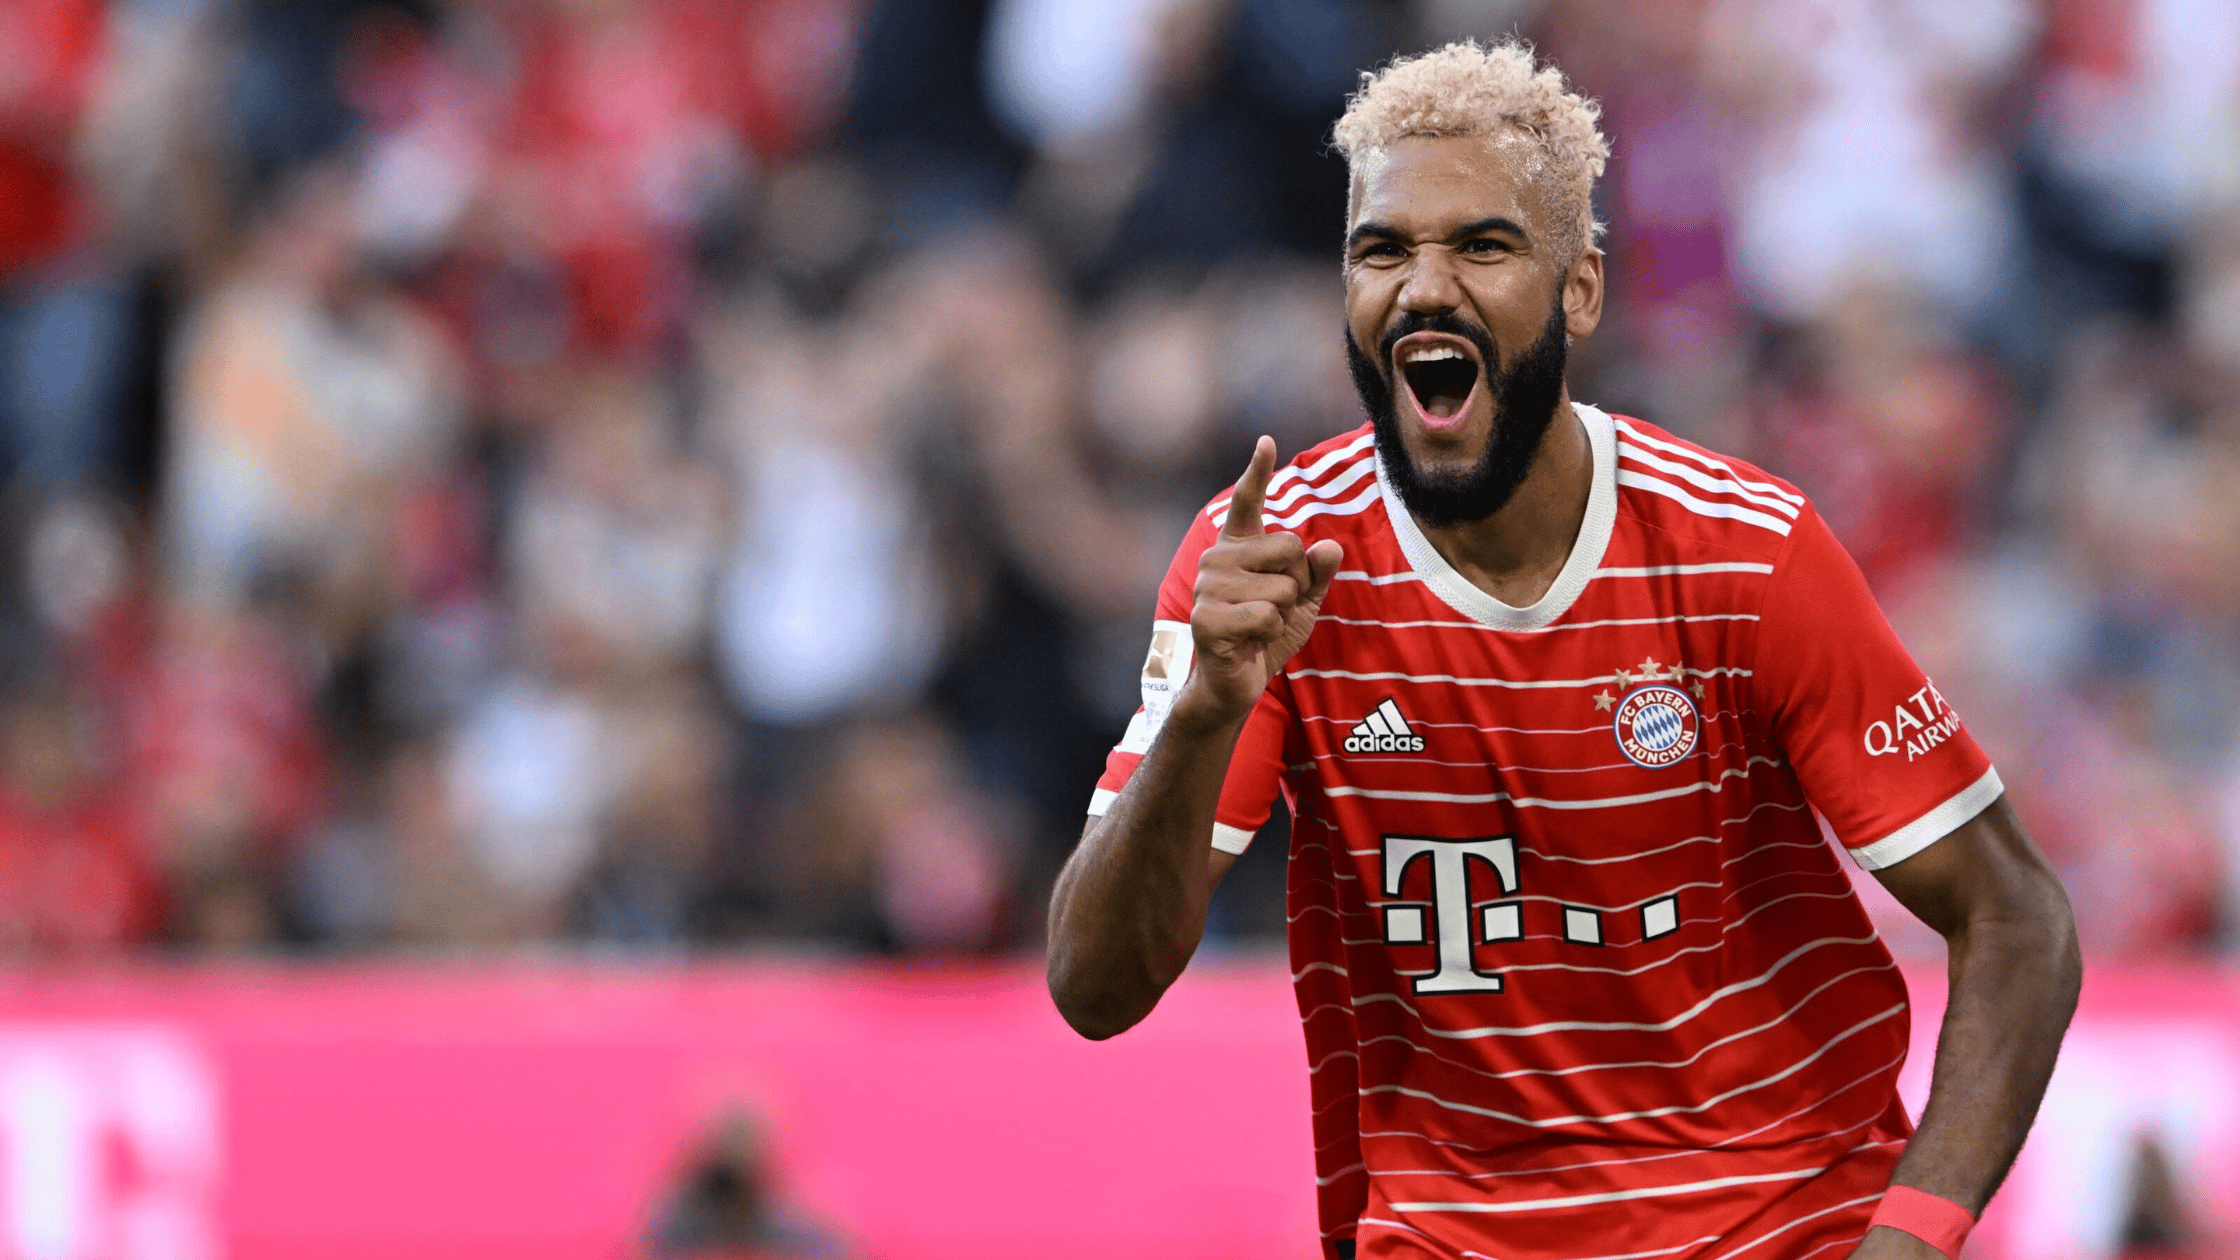 Transfers: United Targets Choupo-Moting as Ronaldo replacement